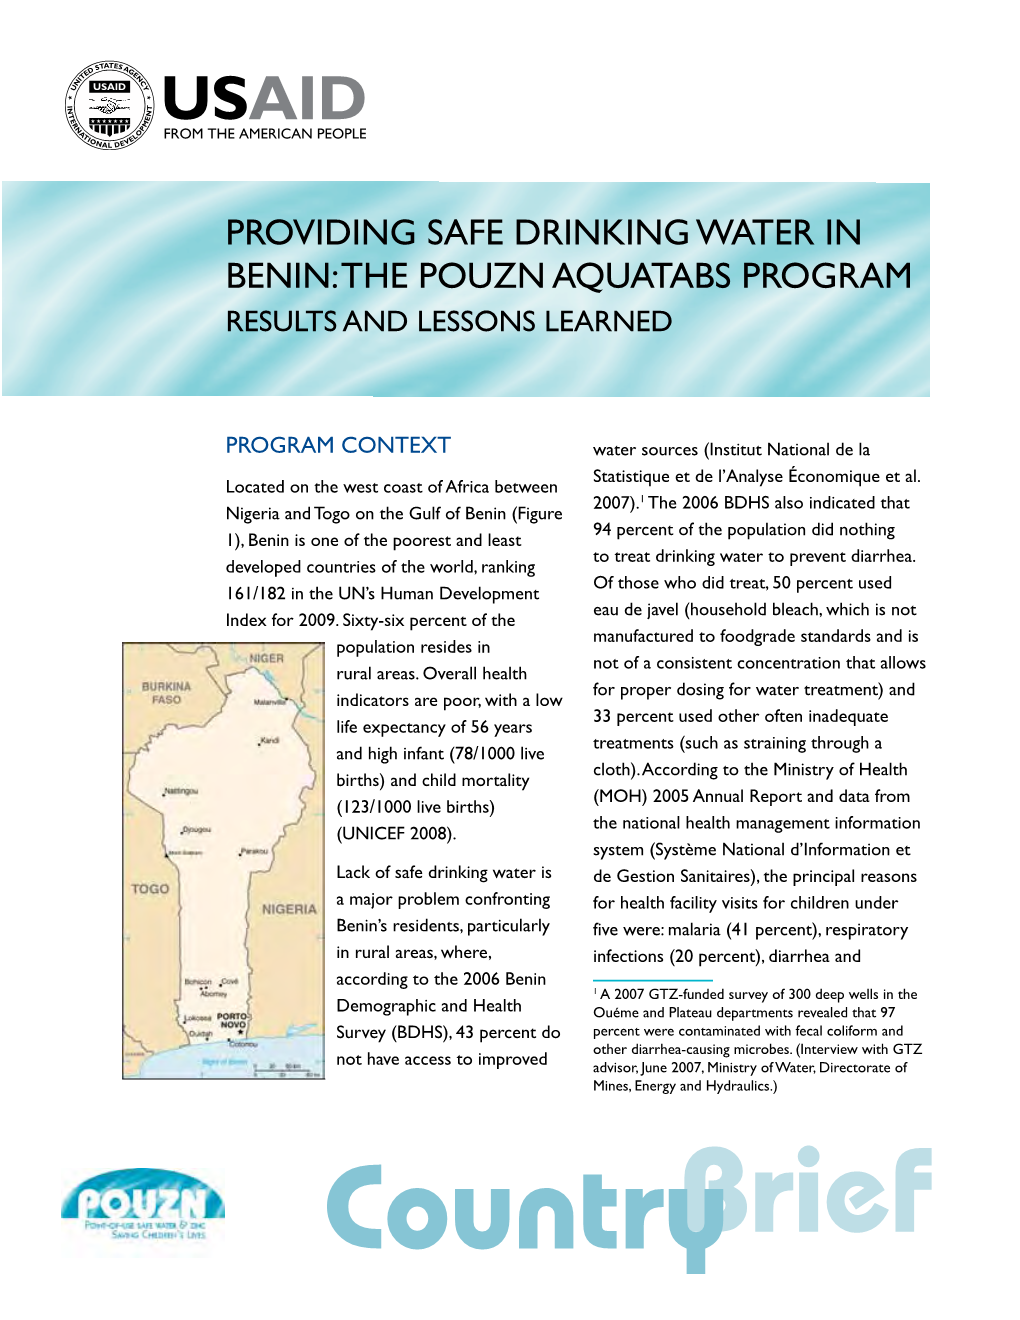 Providing Safe Drinking Water in Benin: the POUZN Aquatabs Program Results and Lessons Learned